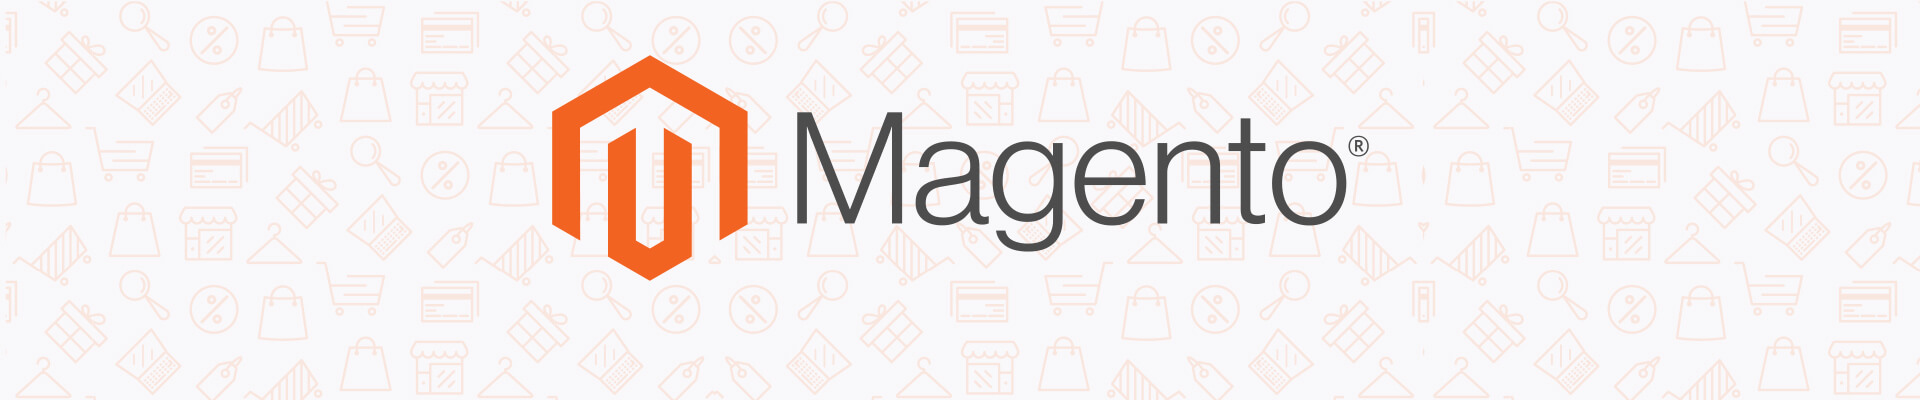 Magento – One Stop Destination For All ECommerce Needs Banner